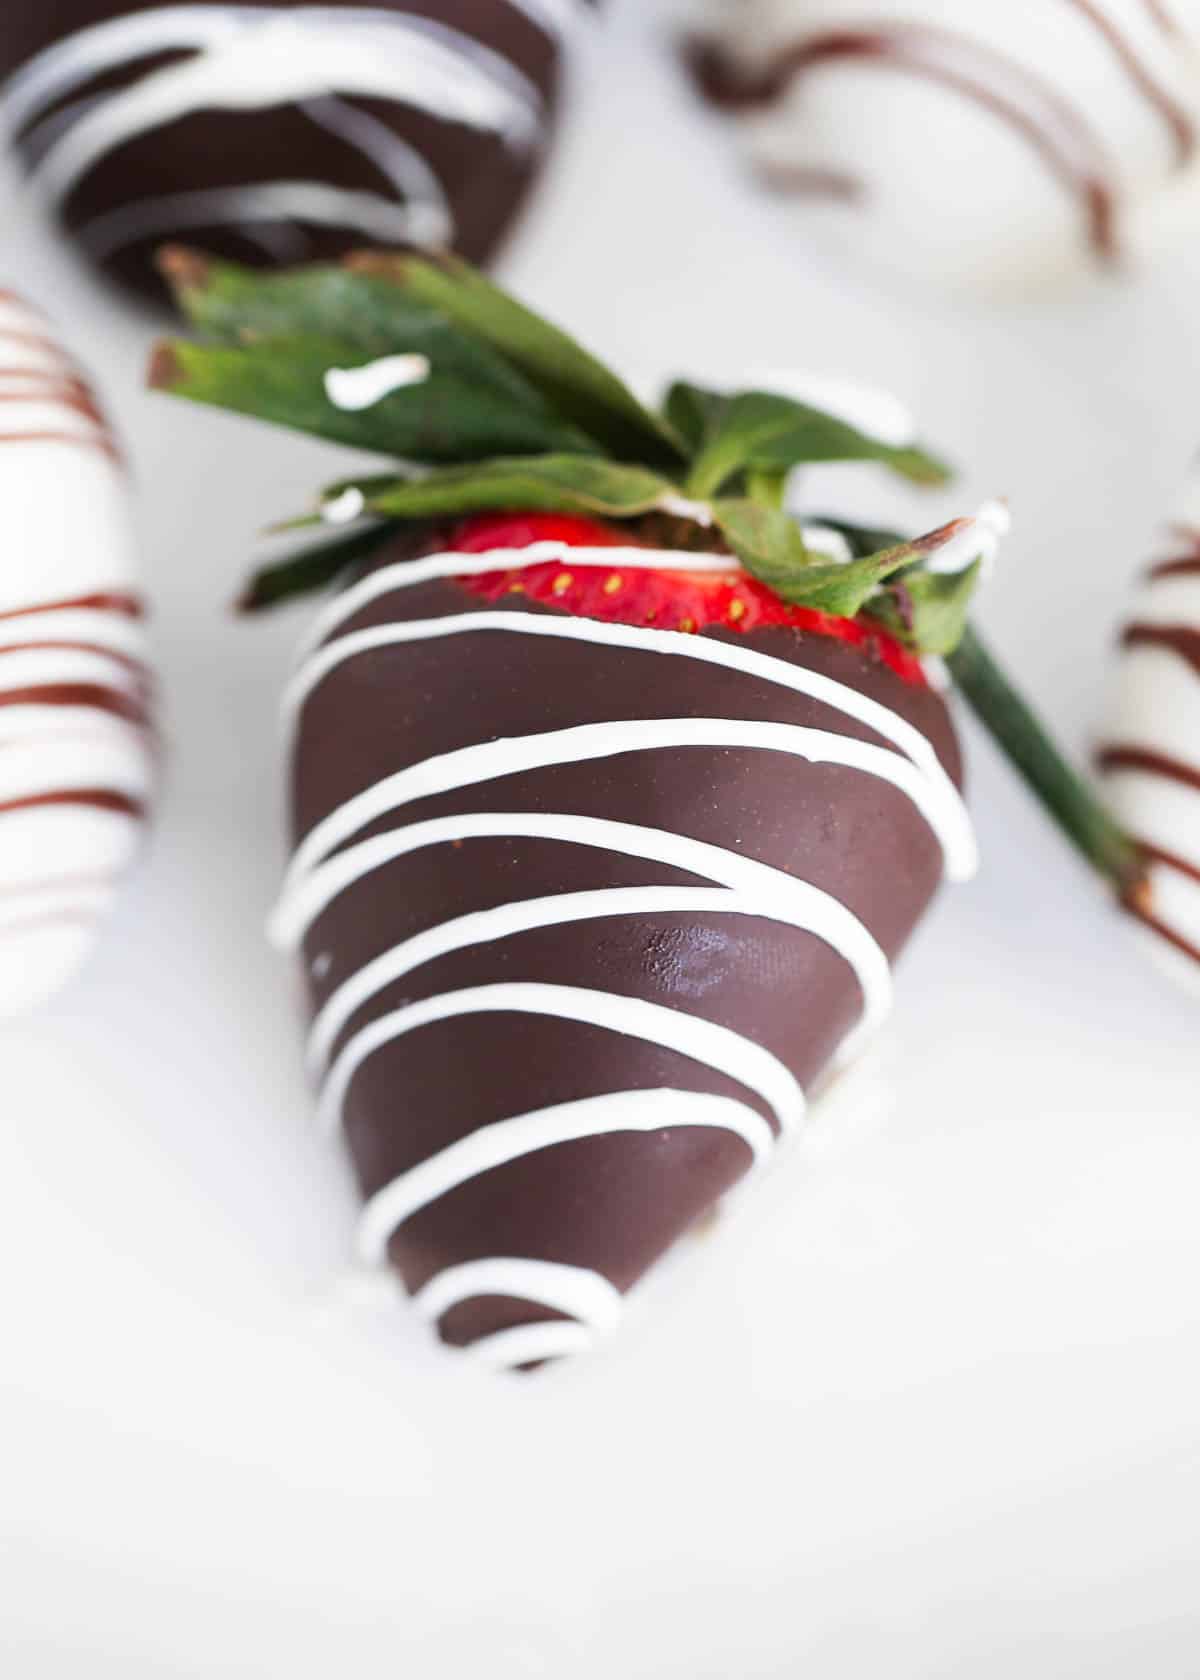 Delicious chocolate covered strawberries on a white plate